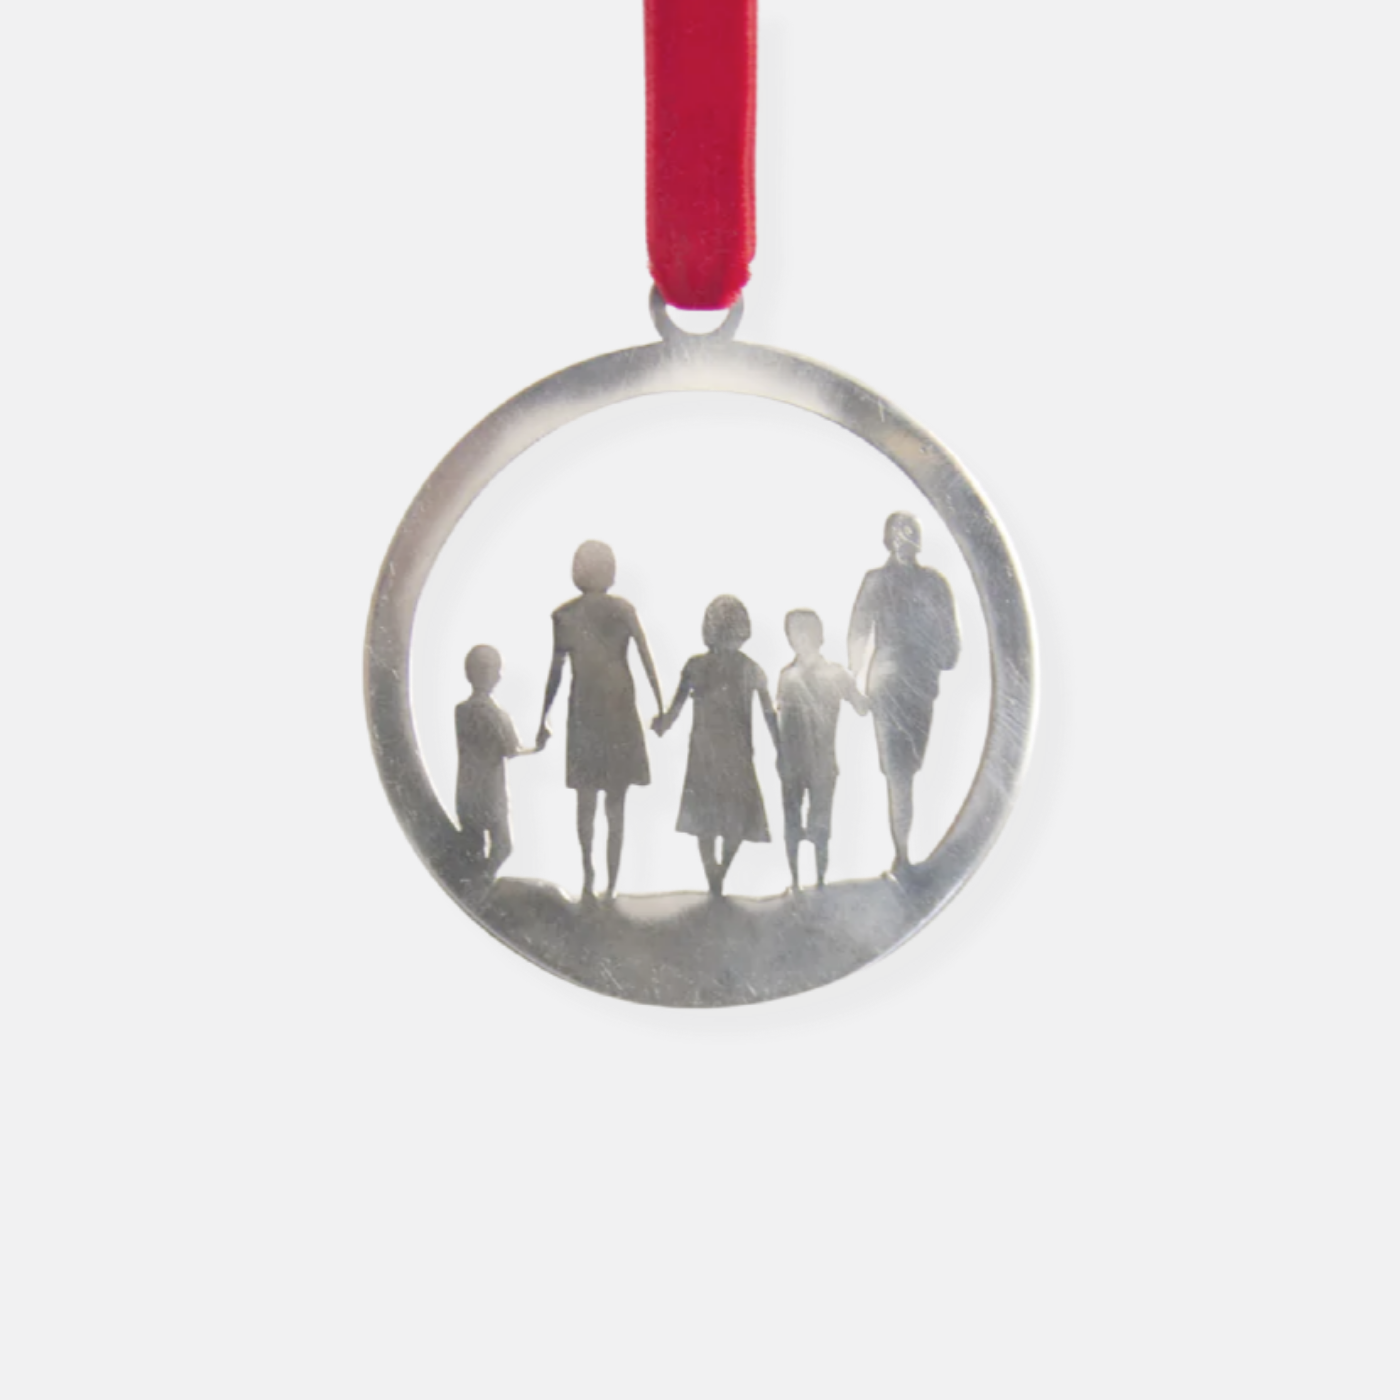 Additional Copy - Full Body & Family Silhouette Ornament